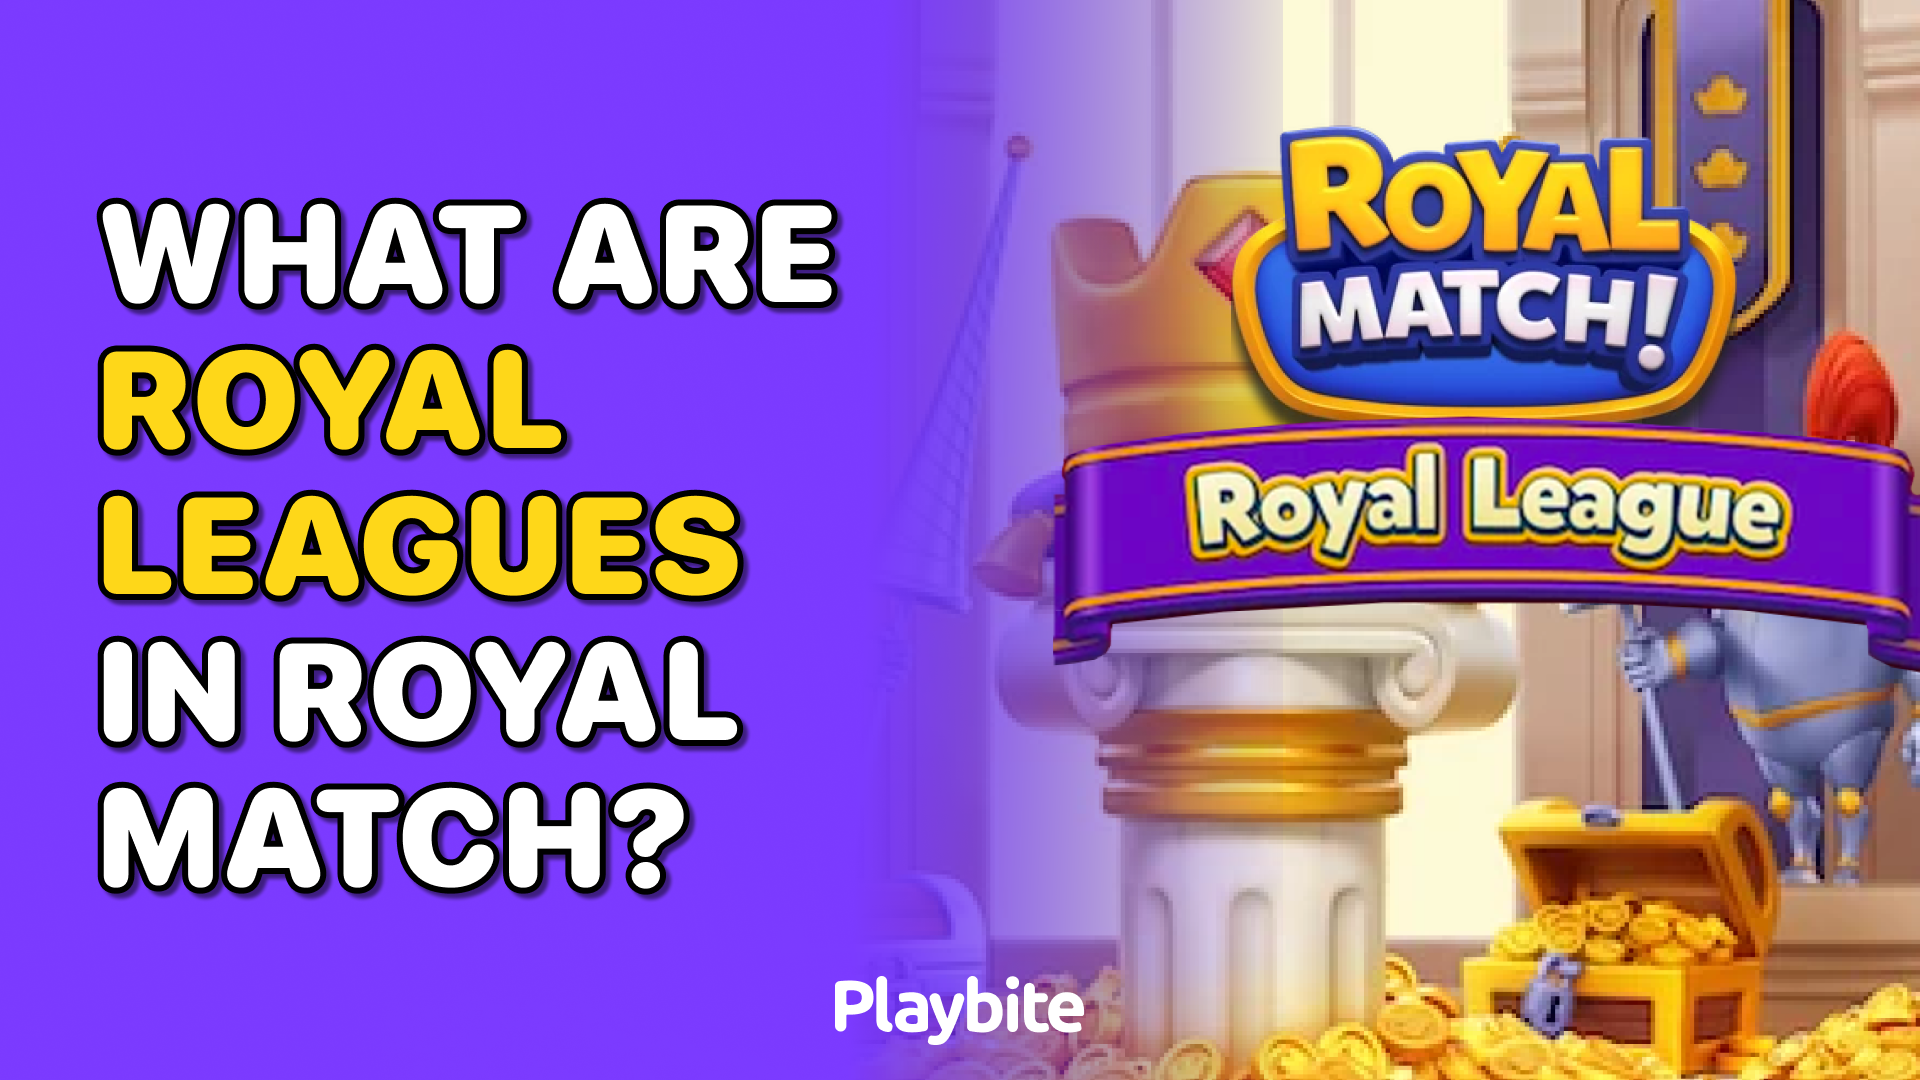 What is Royal League in Royal Match?